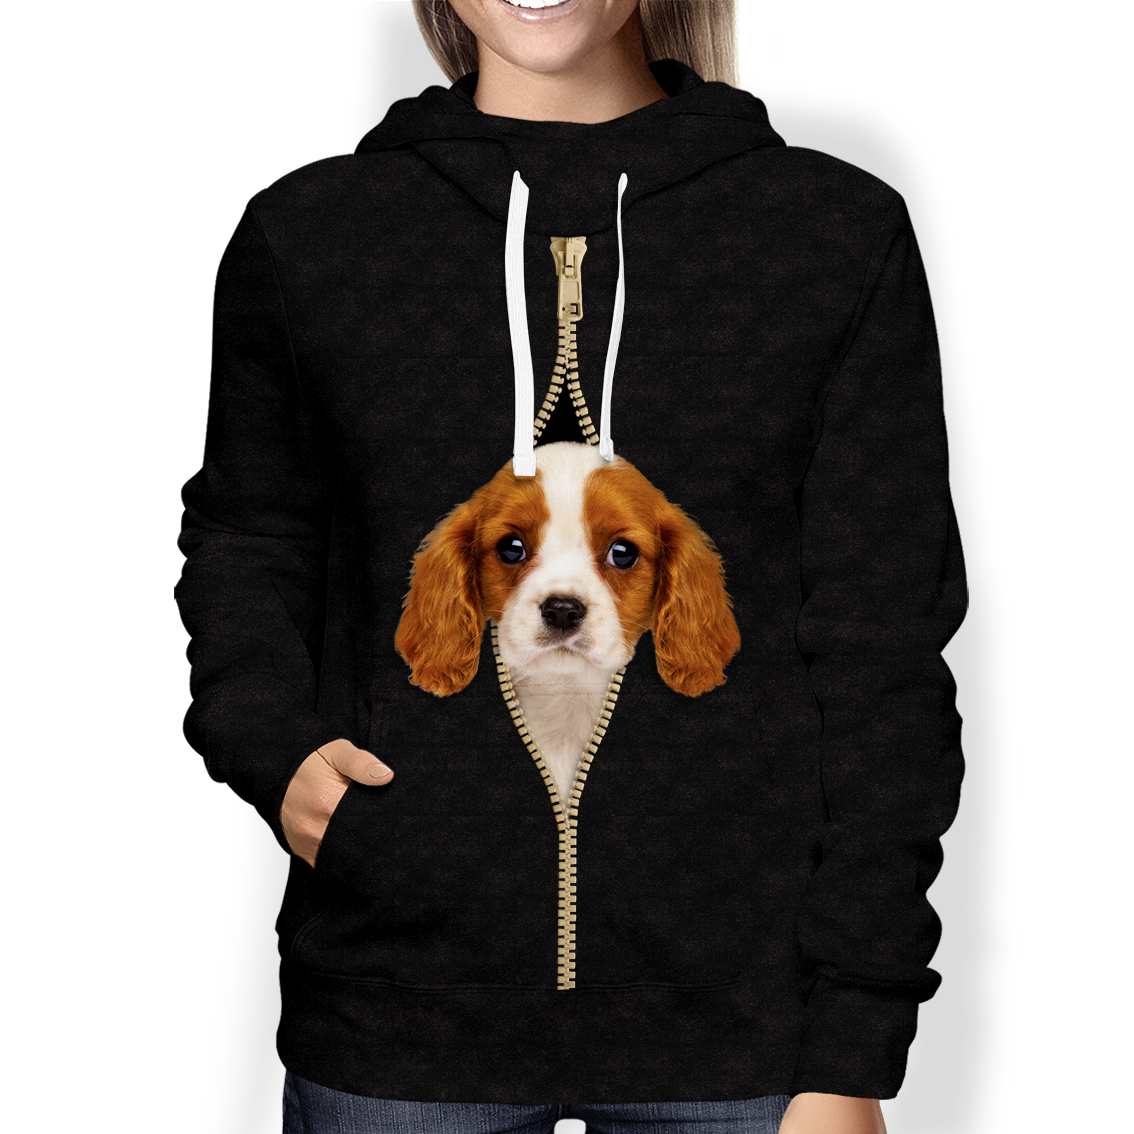 I'm With You - Cavalier King Charles Spaniel Hoodie V4